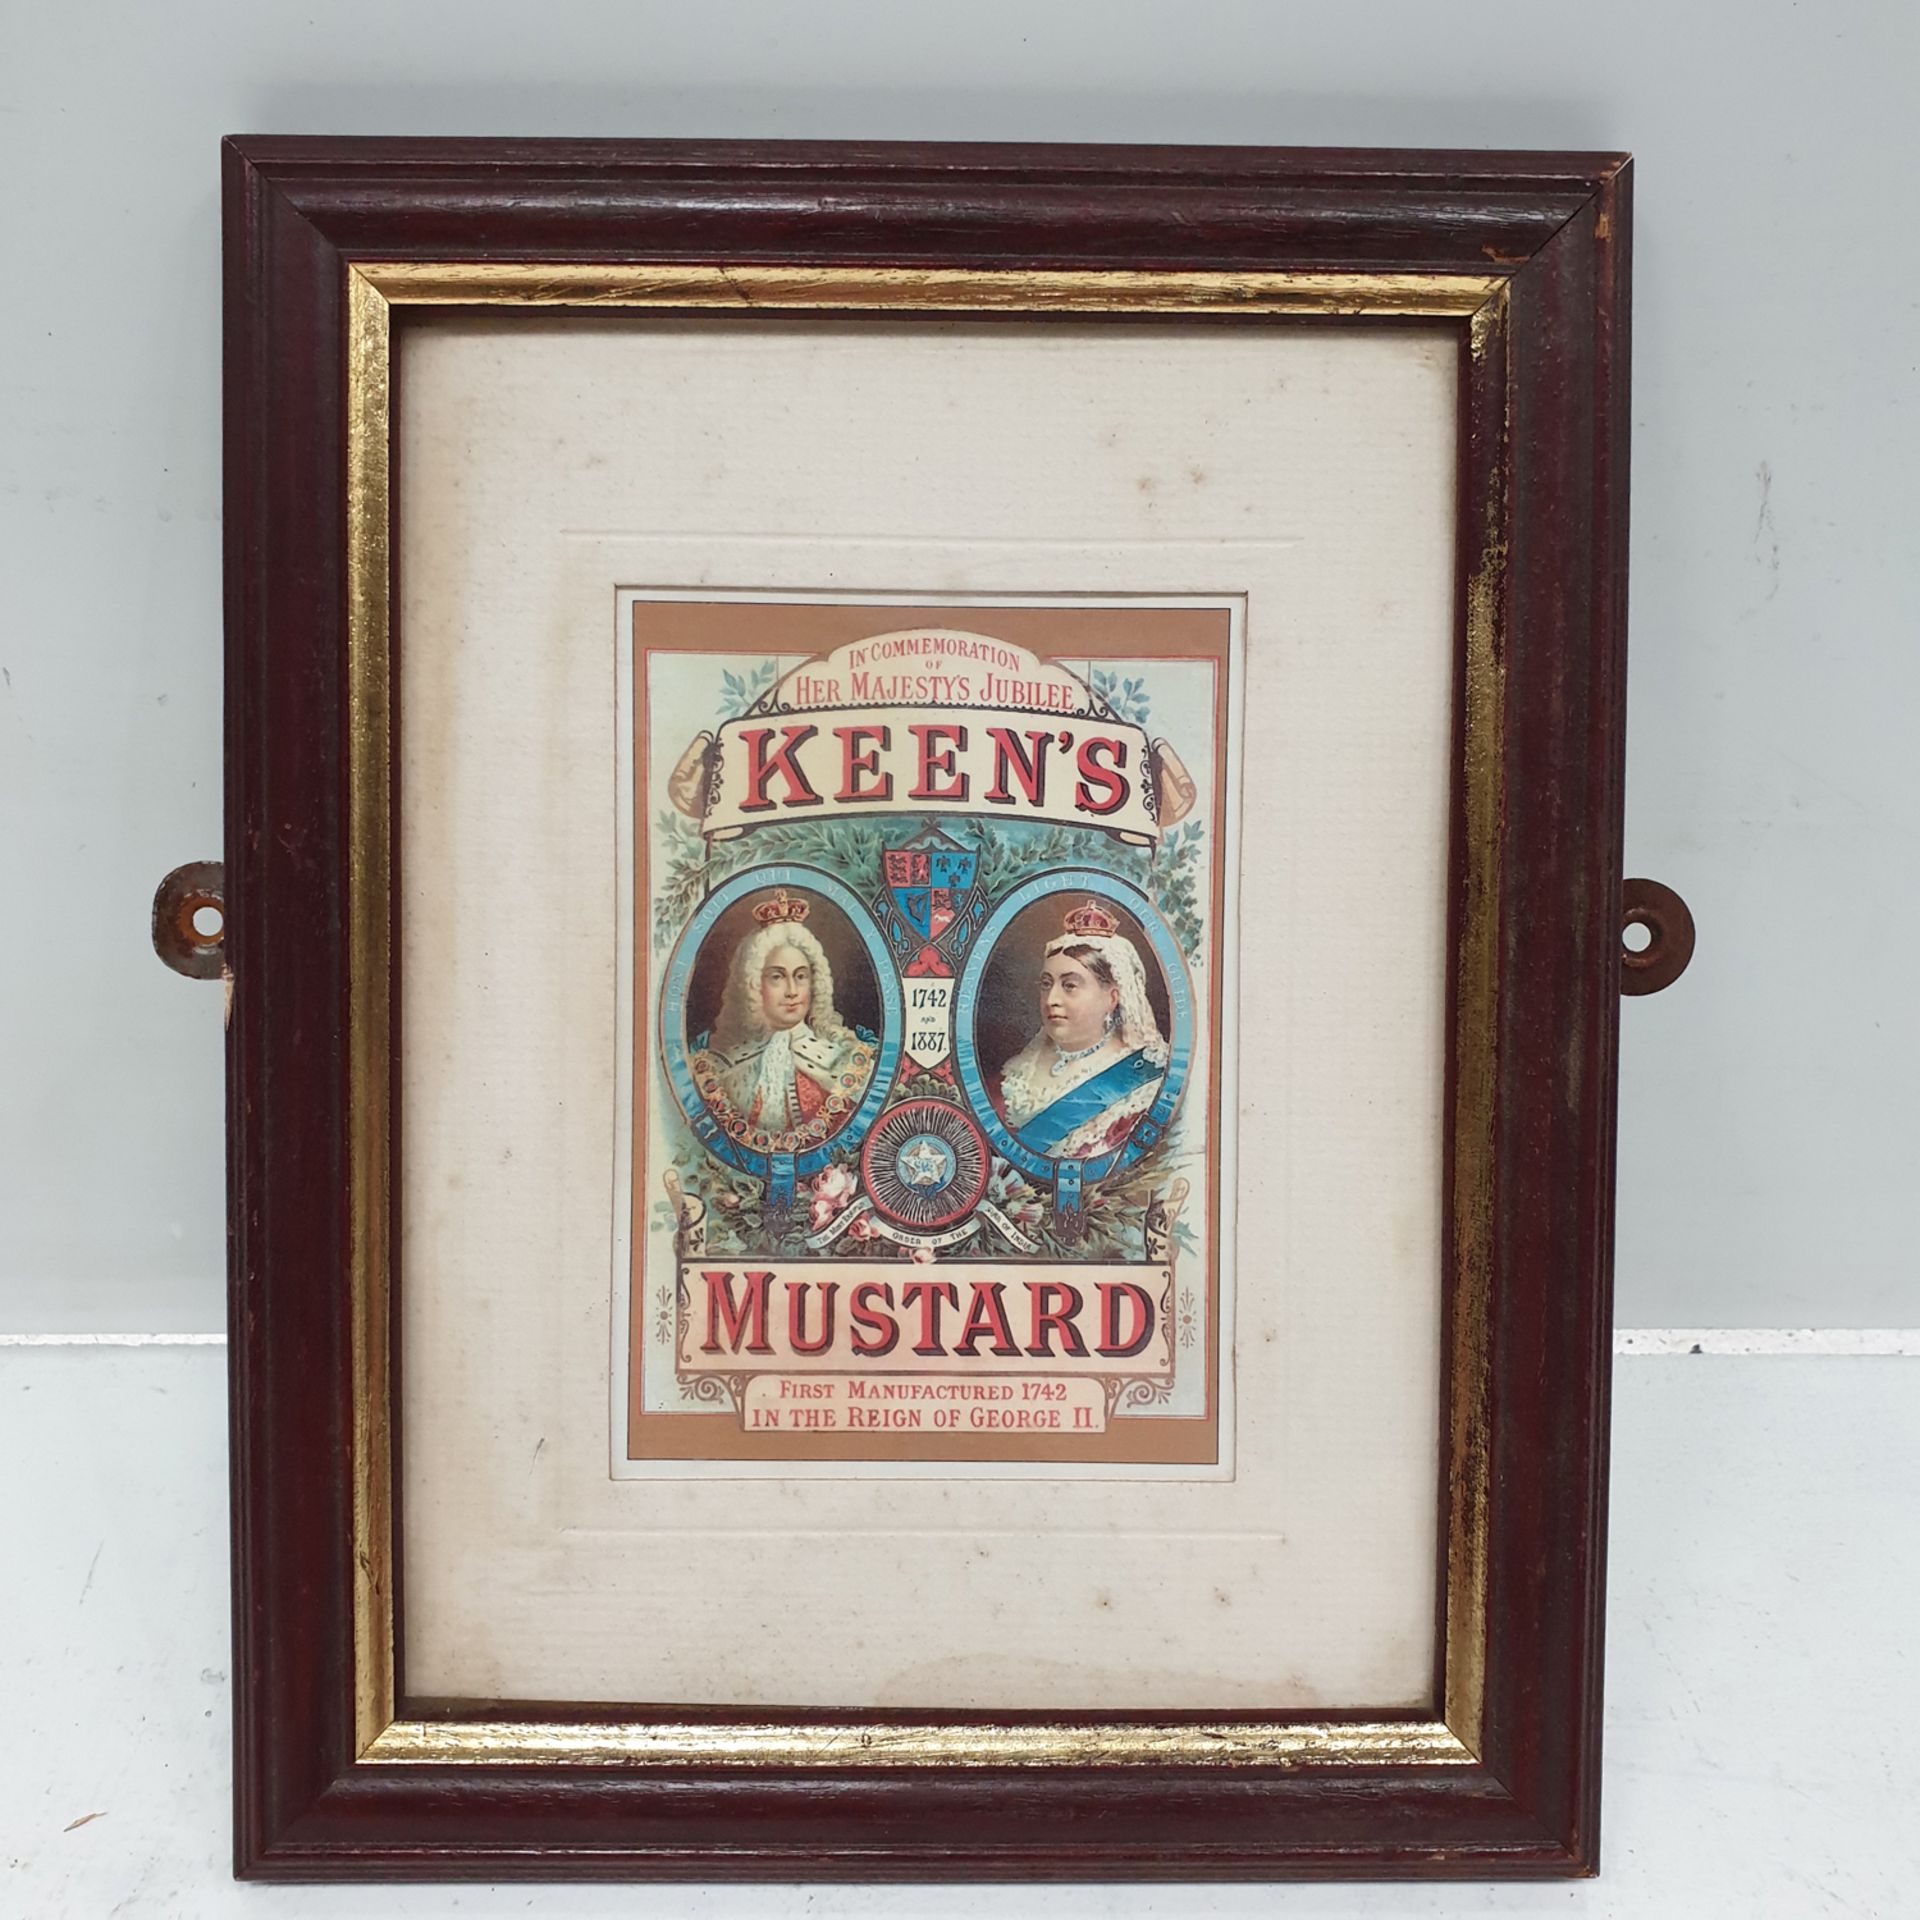 KEENS MUSTARD in Commemoration of Her Majestys Jubilee Framed Picture.